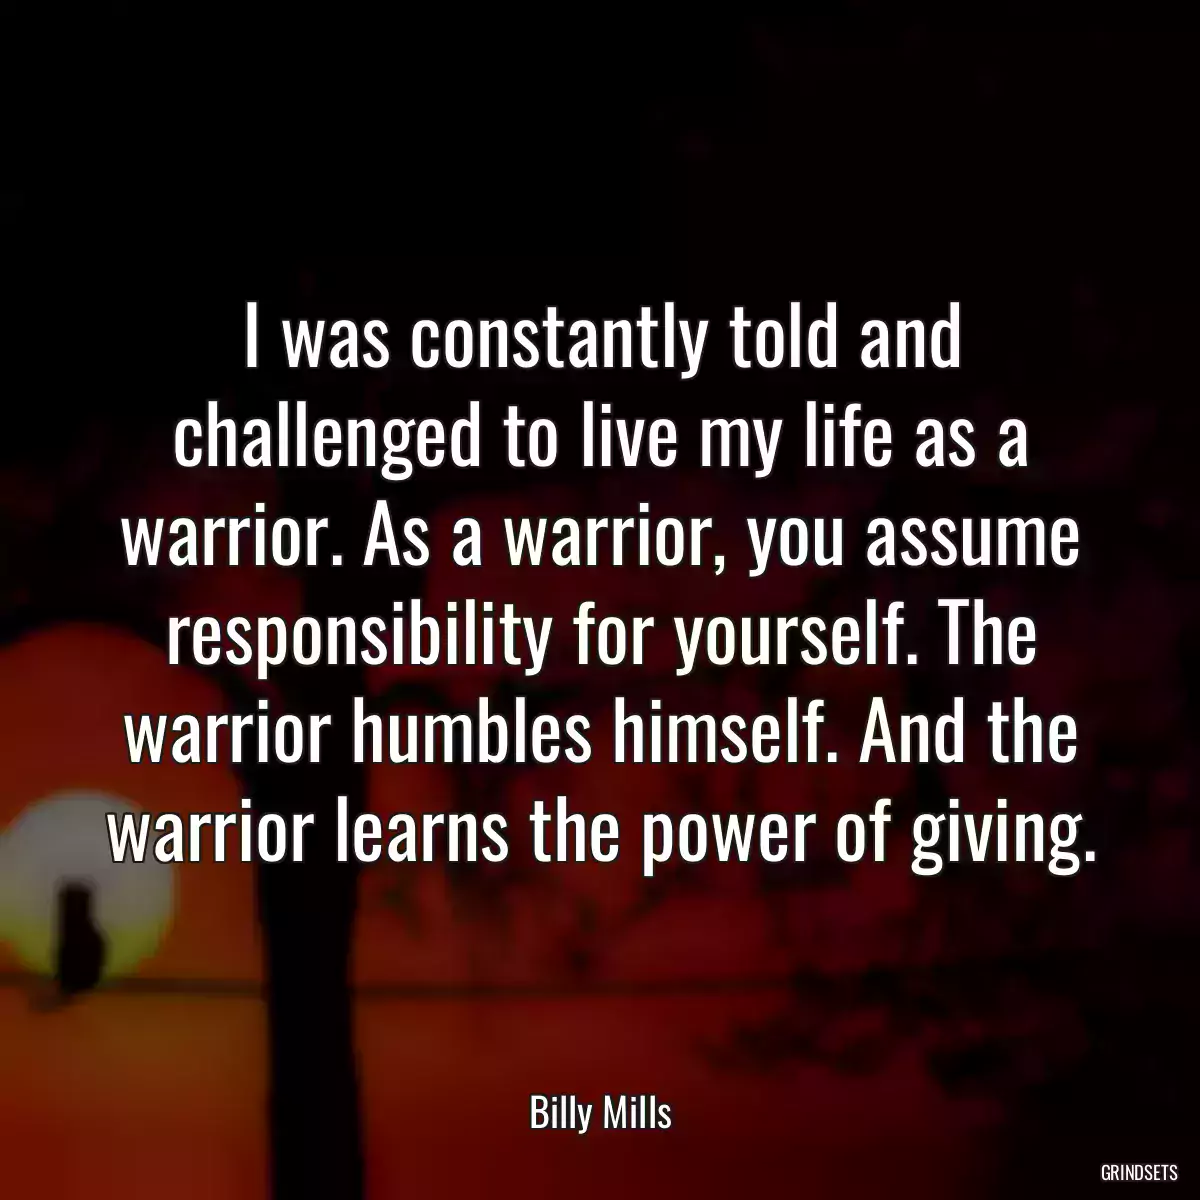 I was constantly told and challenged to live my life as a warrior. As a warrior, you assume responsibility for yourself. The warrior humbles himself. And the warrior learns the power of giving.